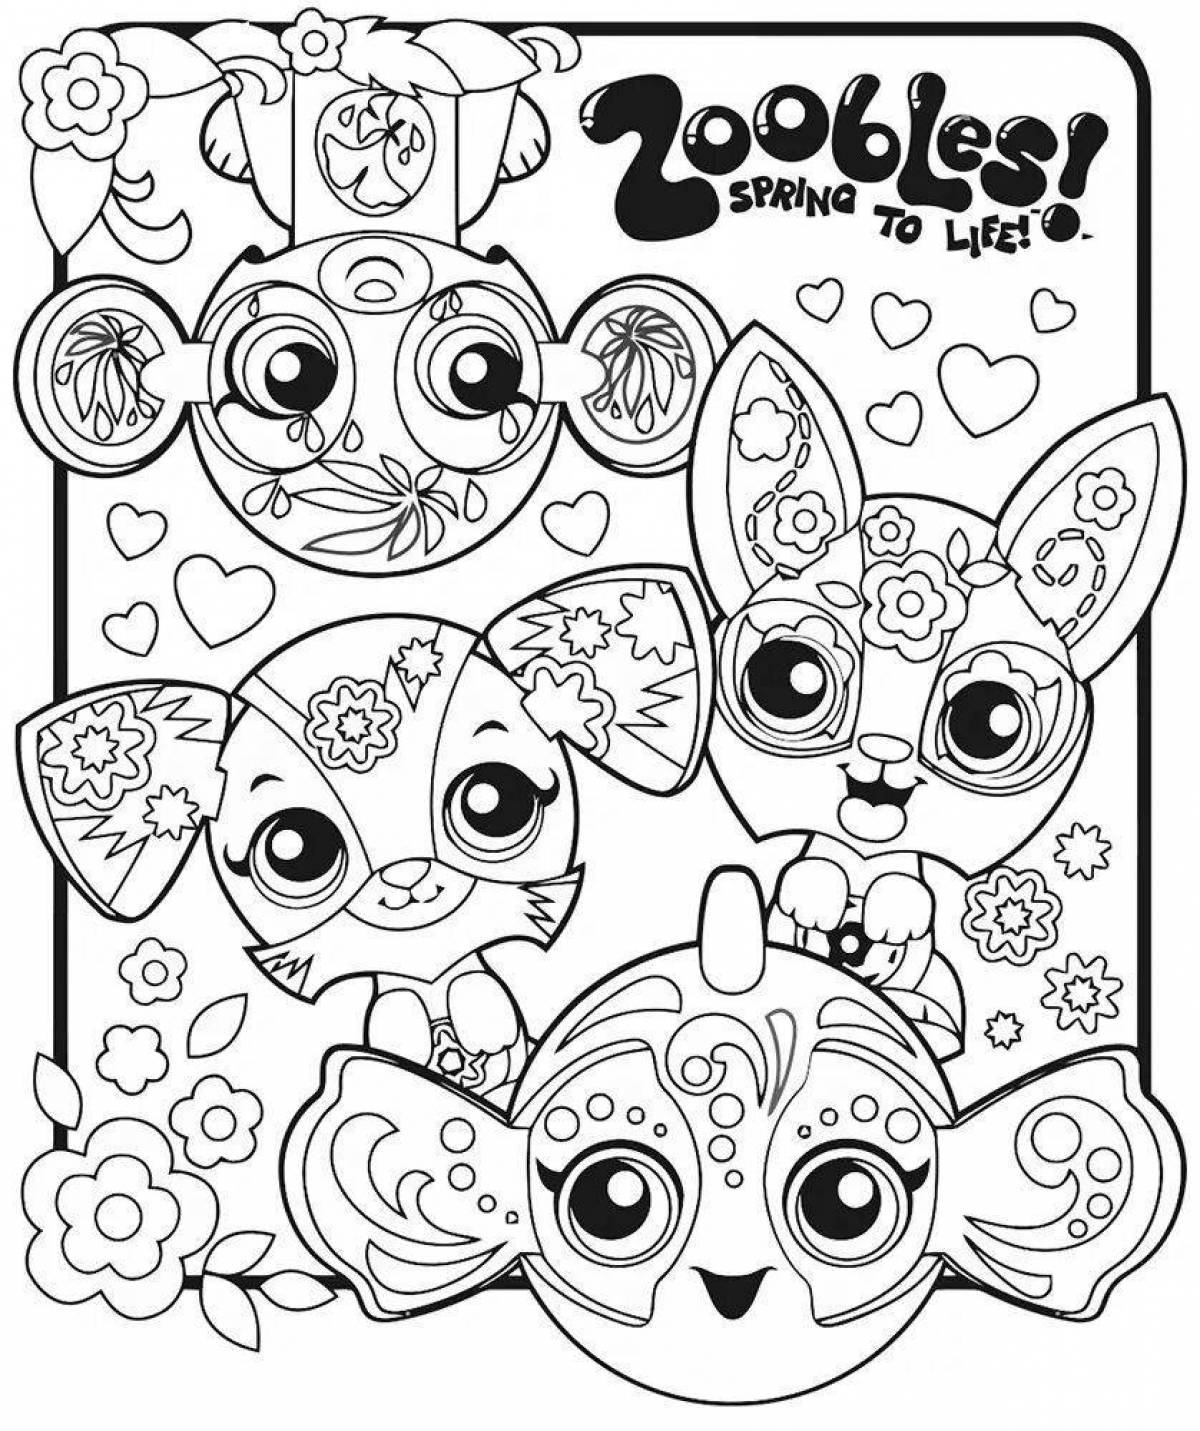 Attractive zoobles coloring